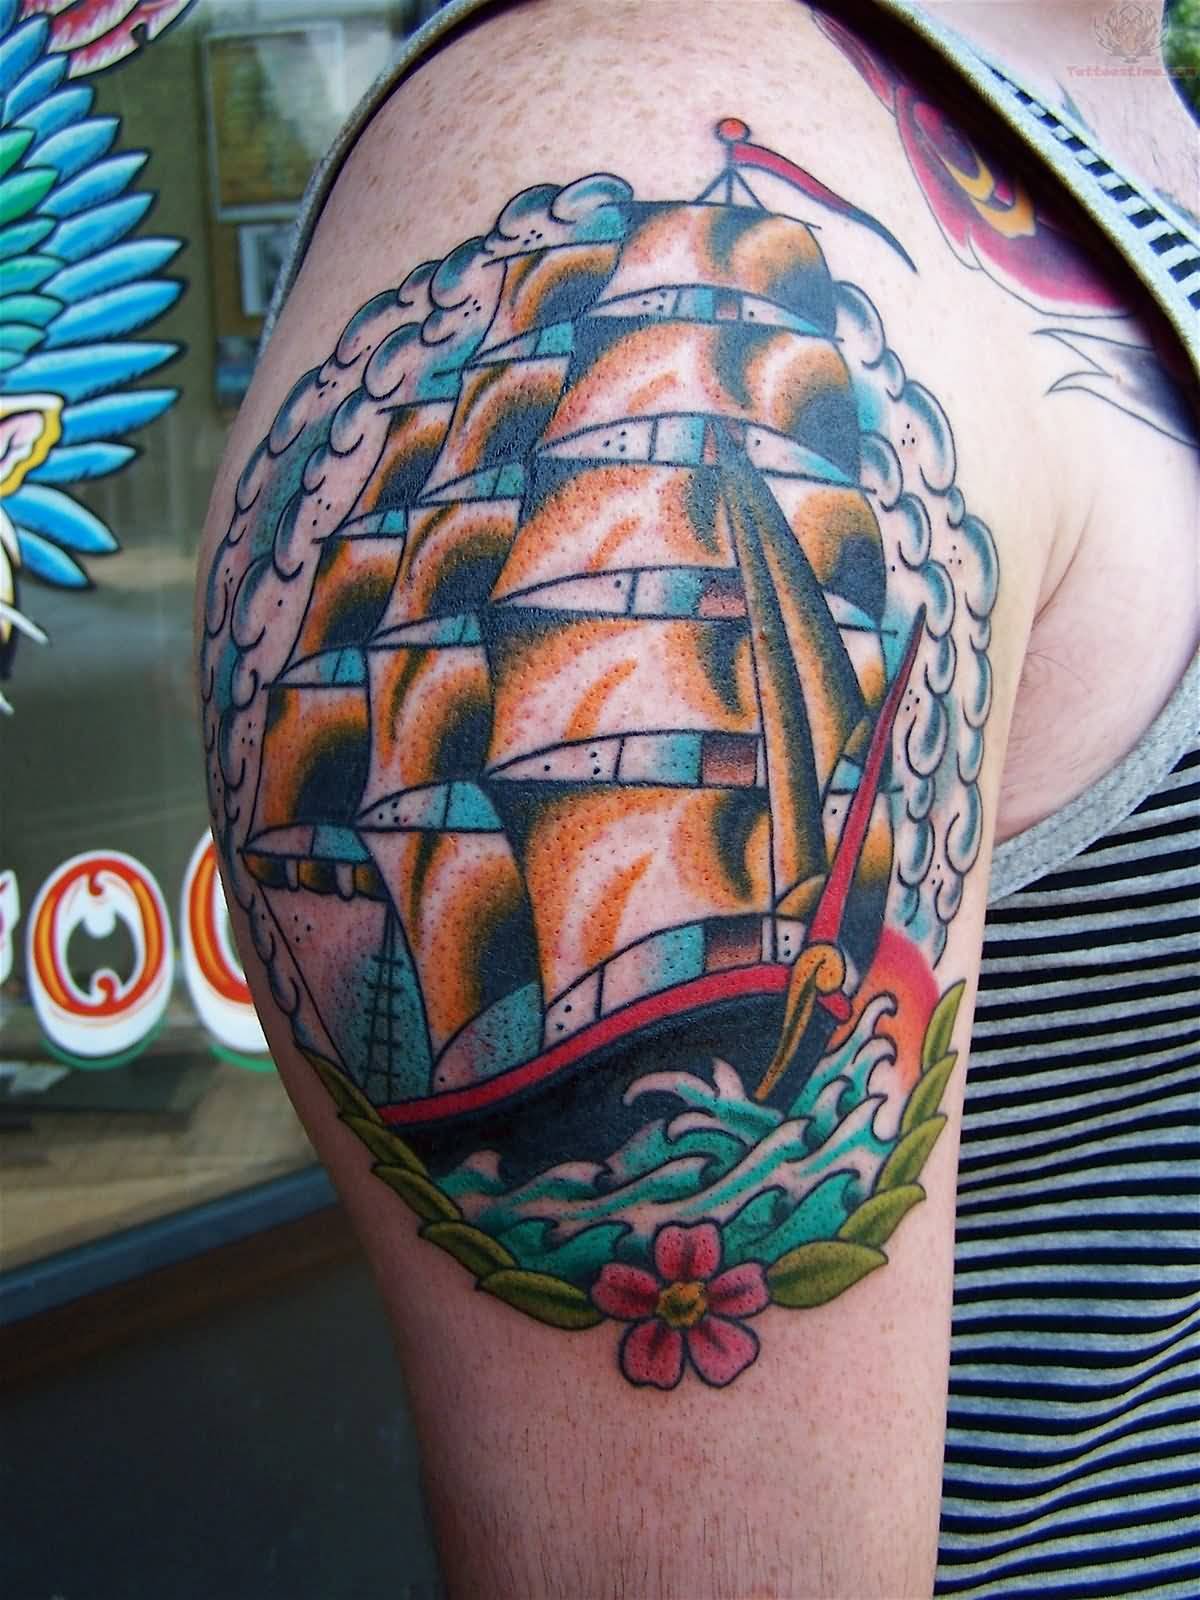 Colorful Neo Pirate Ship Tattoo On Man Right Shoulder